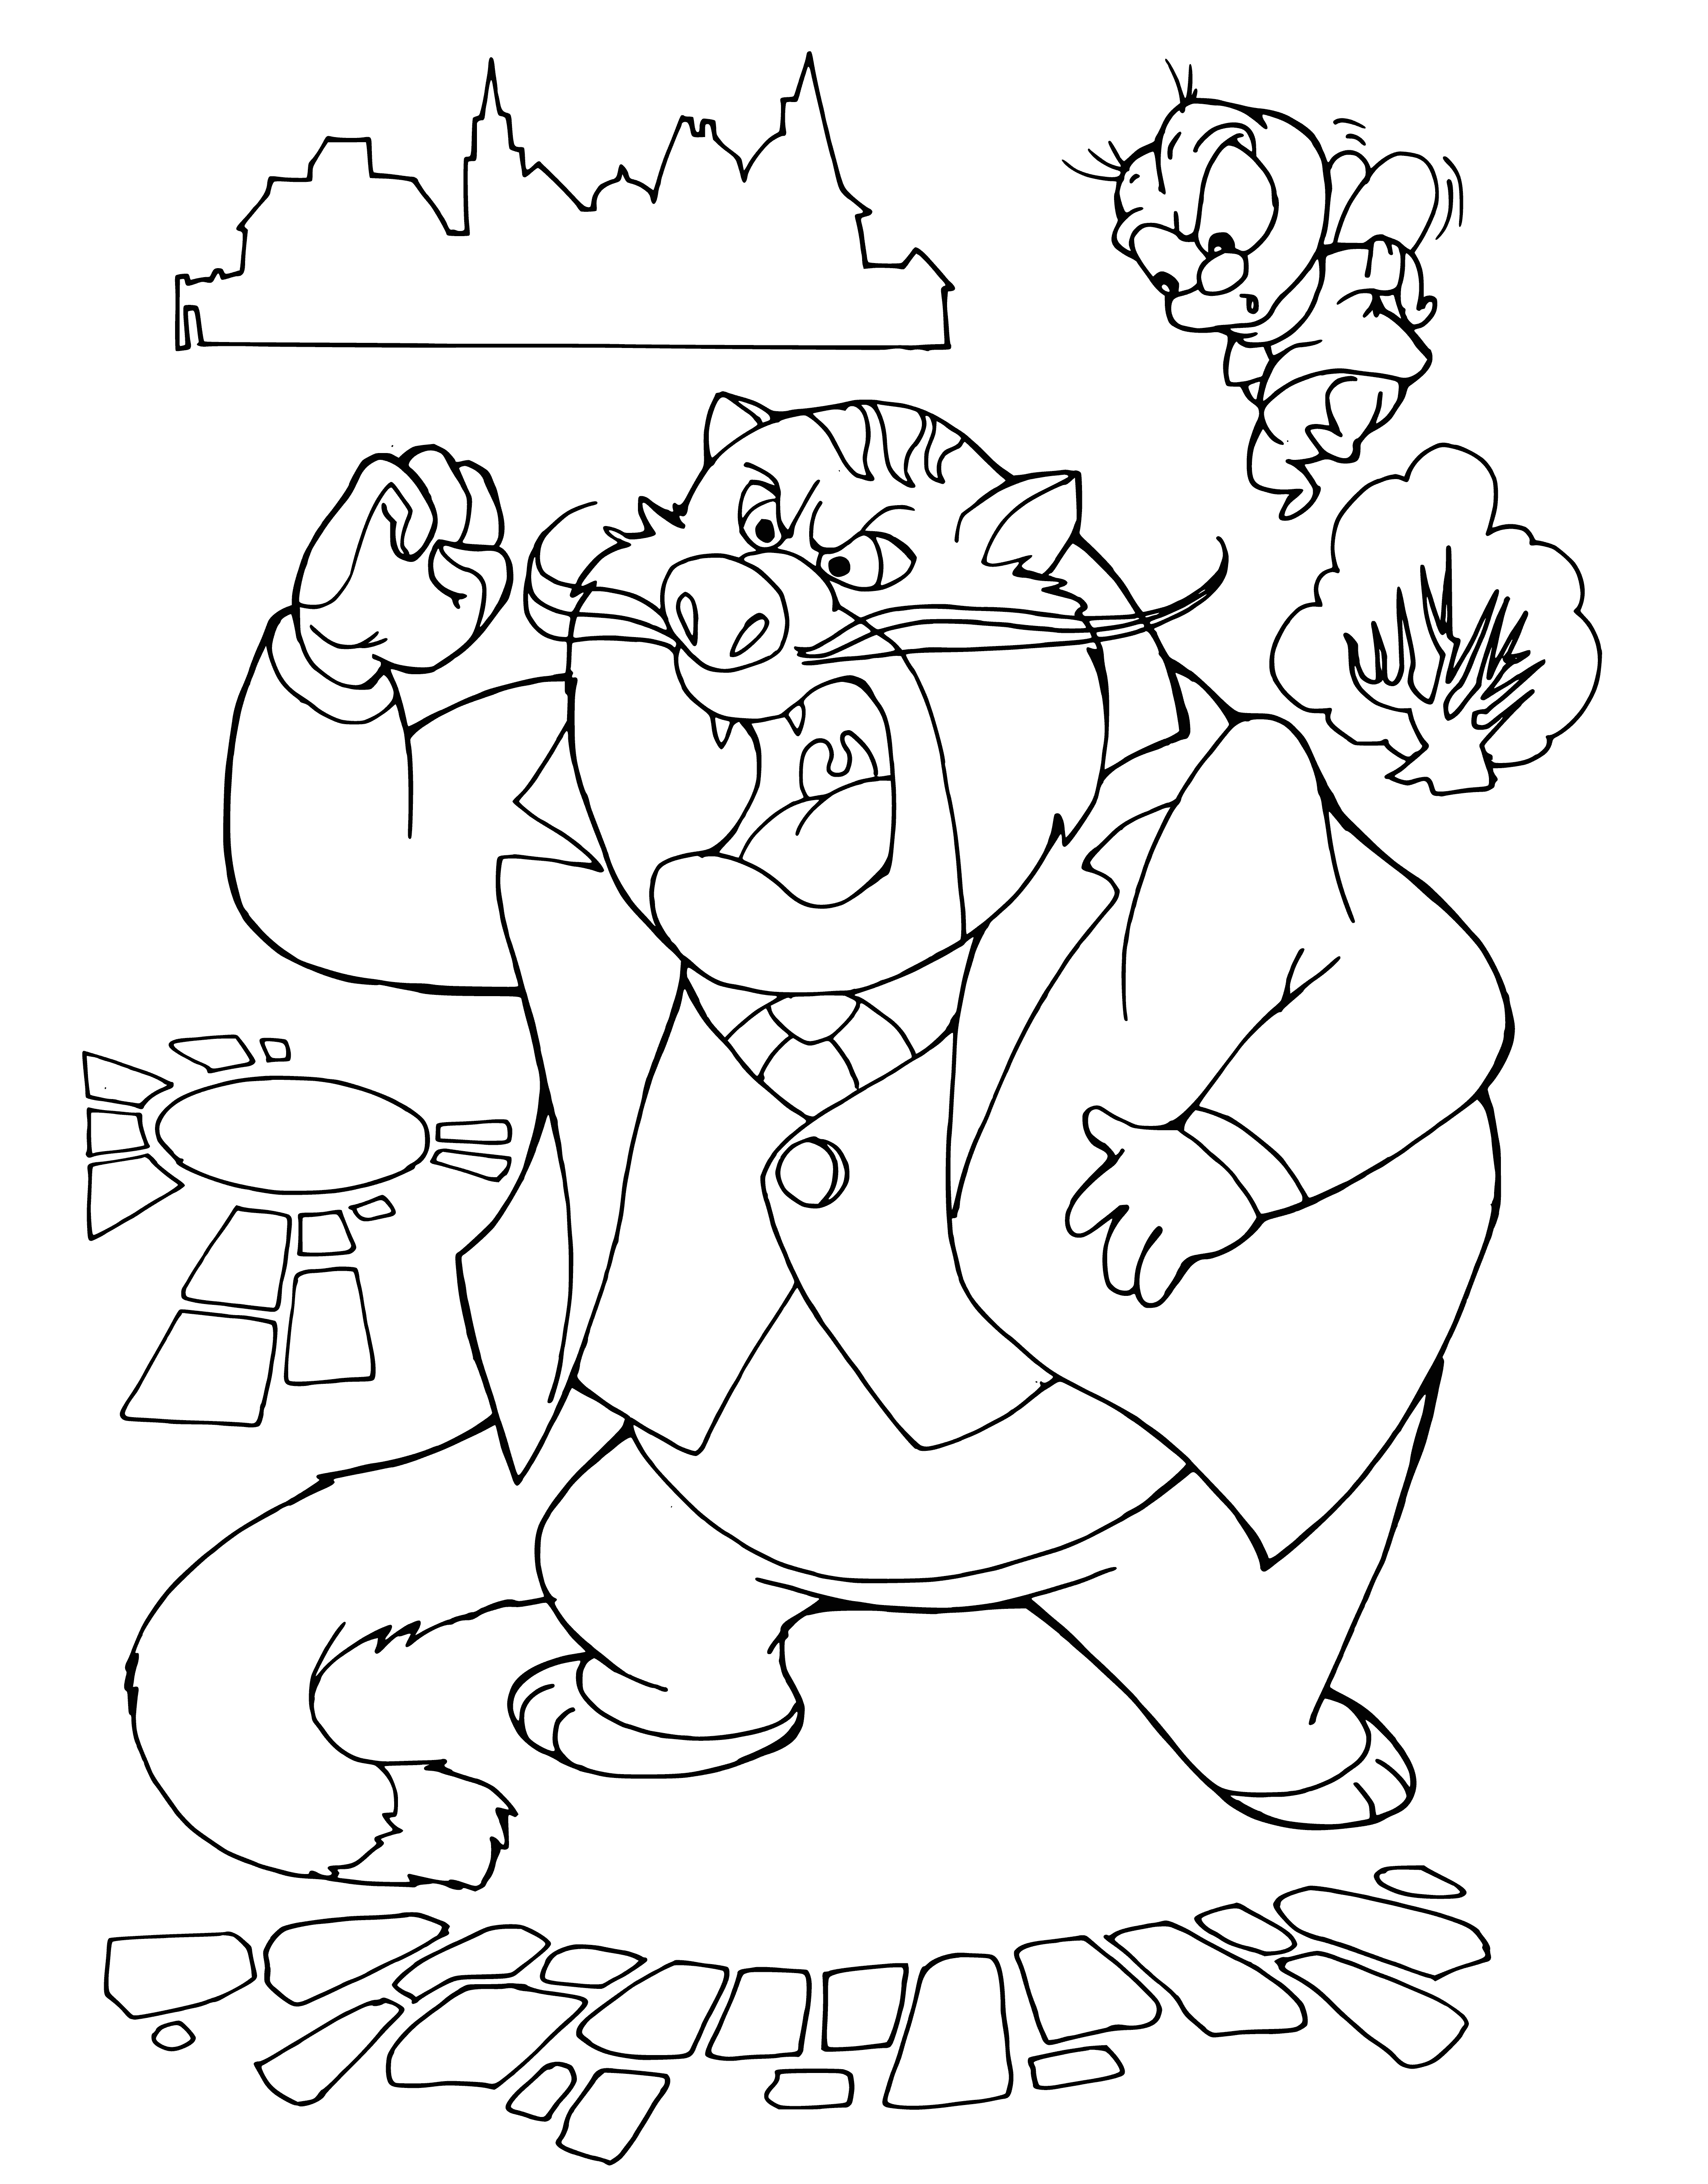 coloring page: Two rabbits and an orange cat standing on hind legs; cat holds blue bird in paws, yellow bird flying near head.